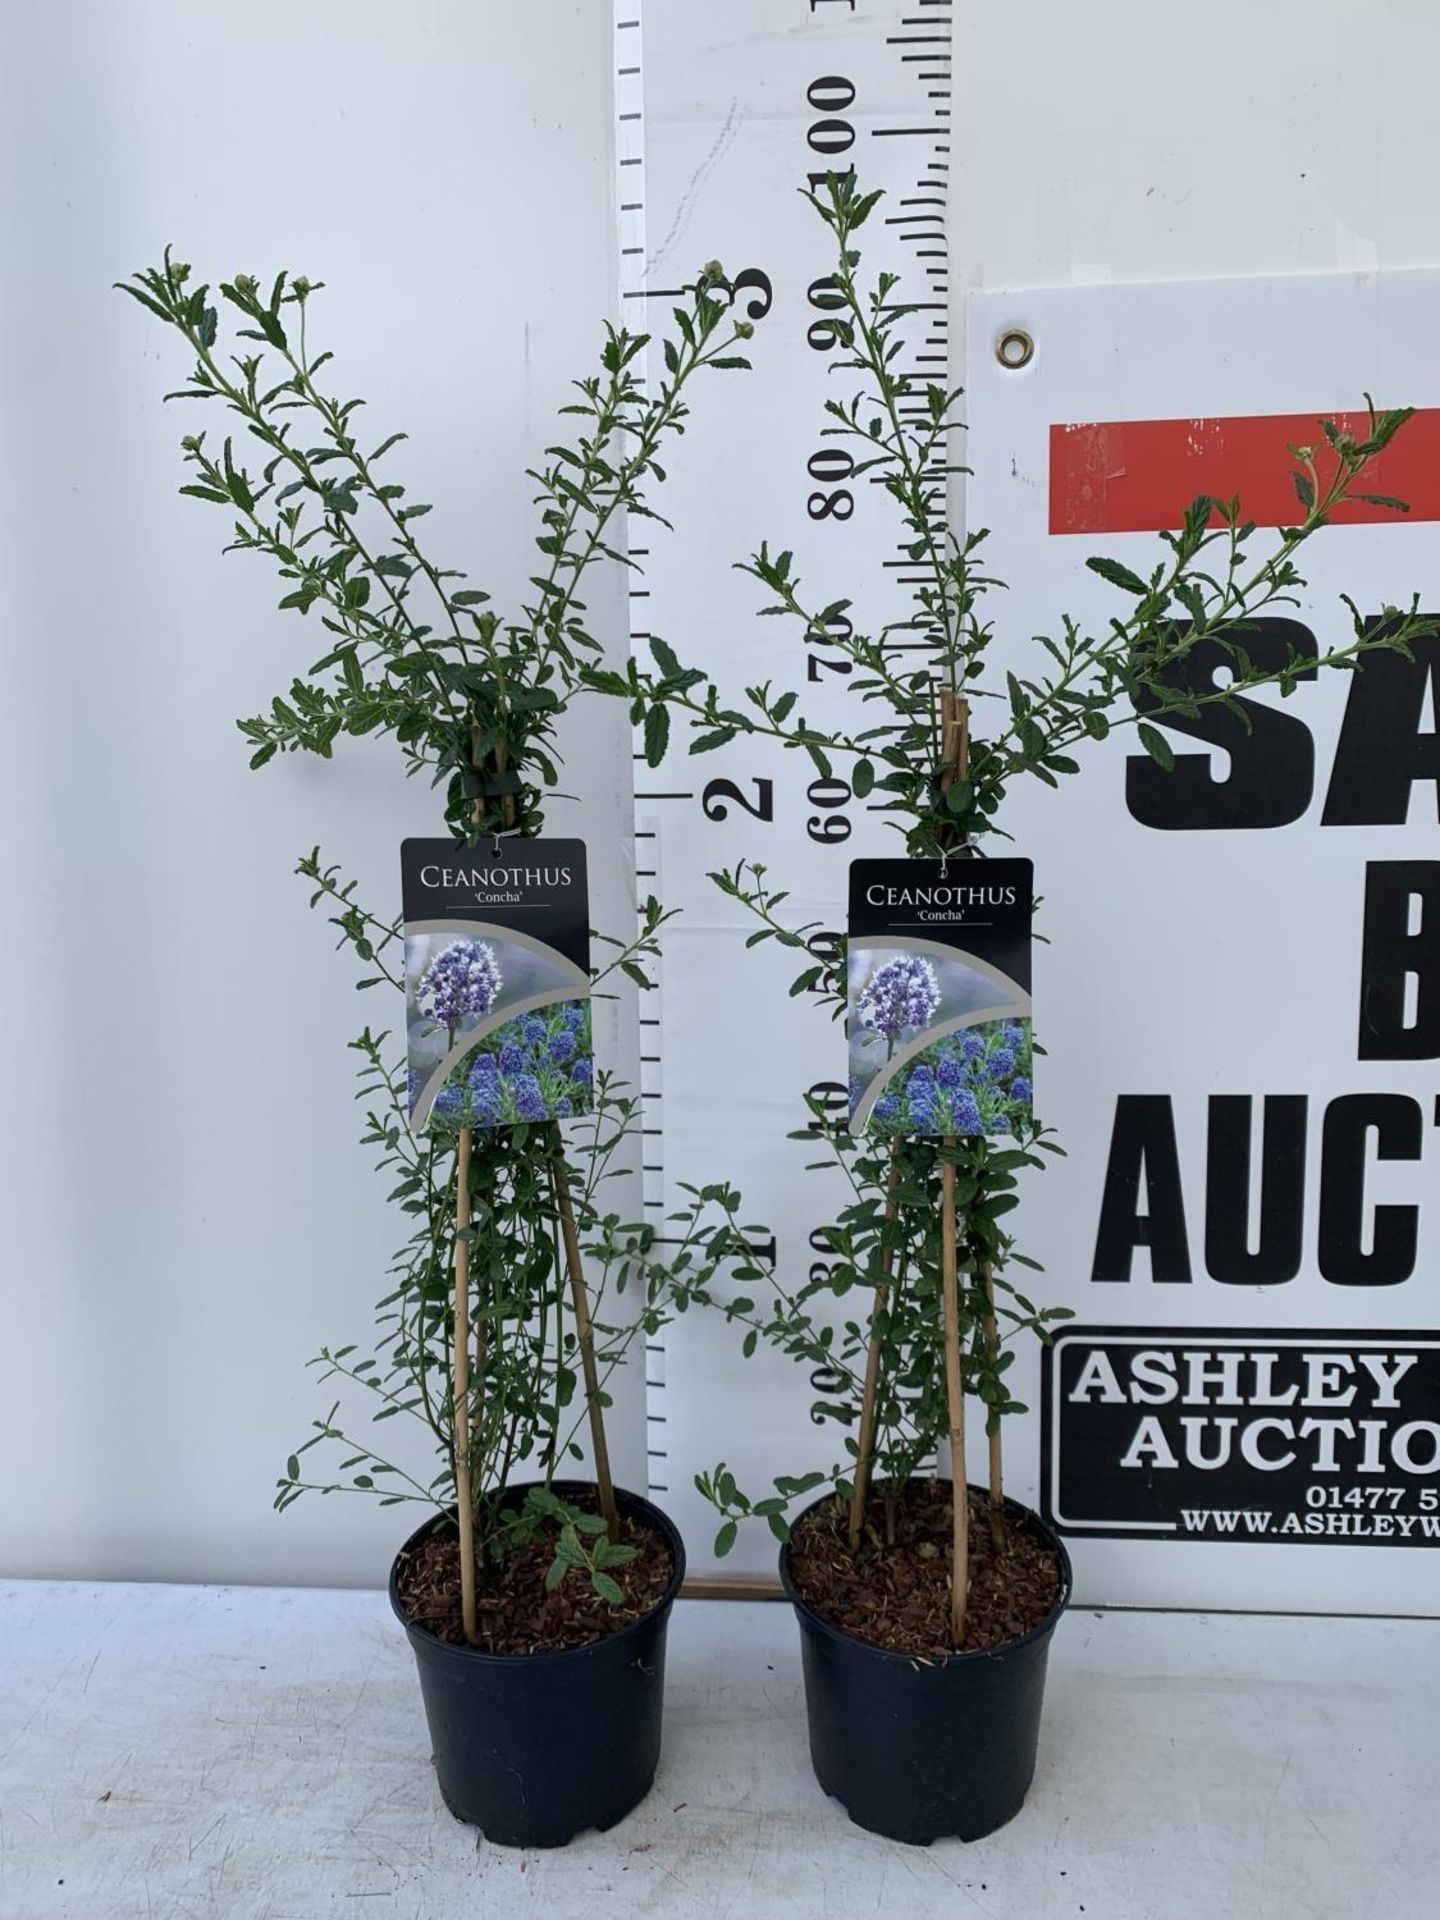 TWO CEANOTHUS CONCHA ON A PYRAMID FRAME 90CM TALL PLUS VAT TO BE SOLD FOR THE TWO - Image 2 of 8